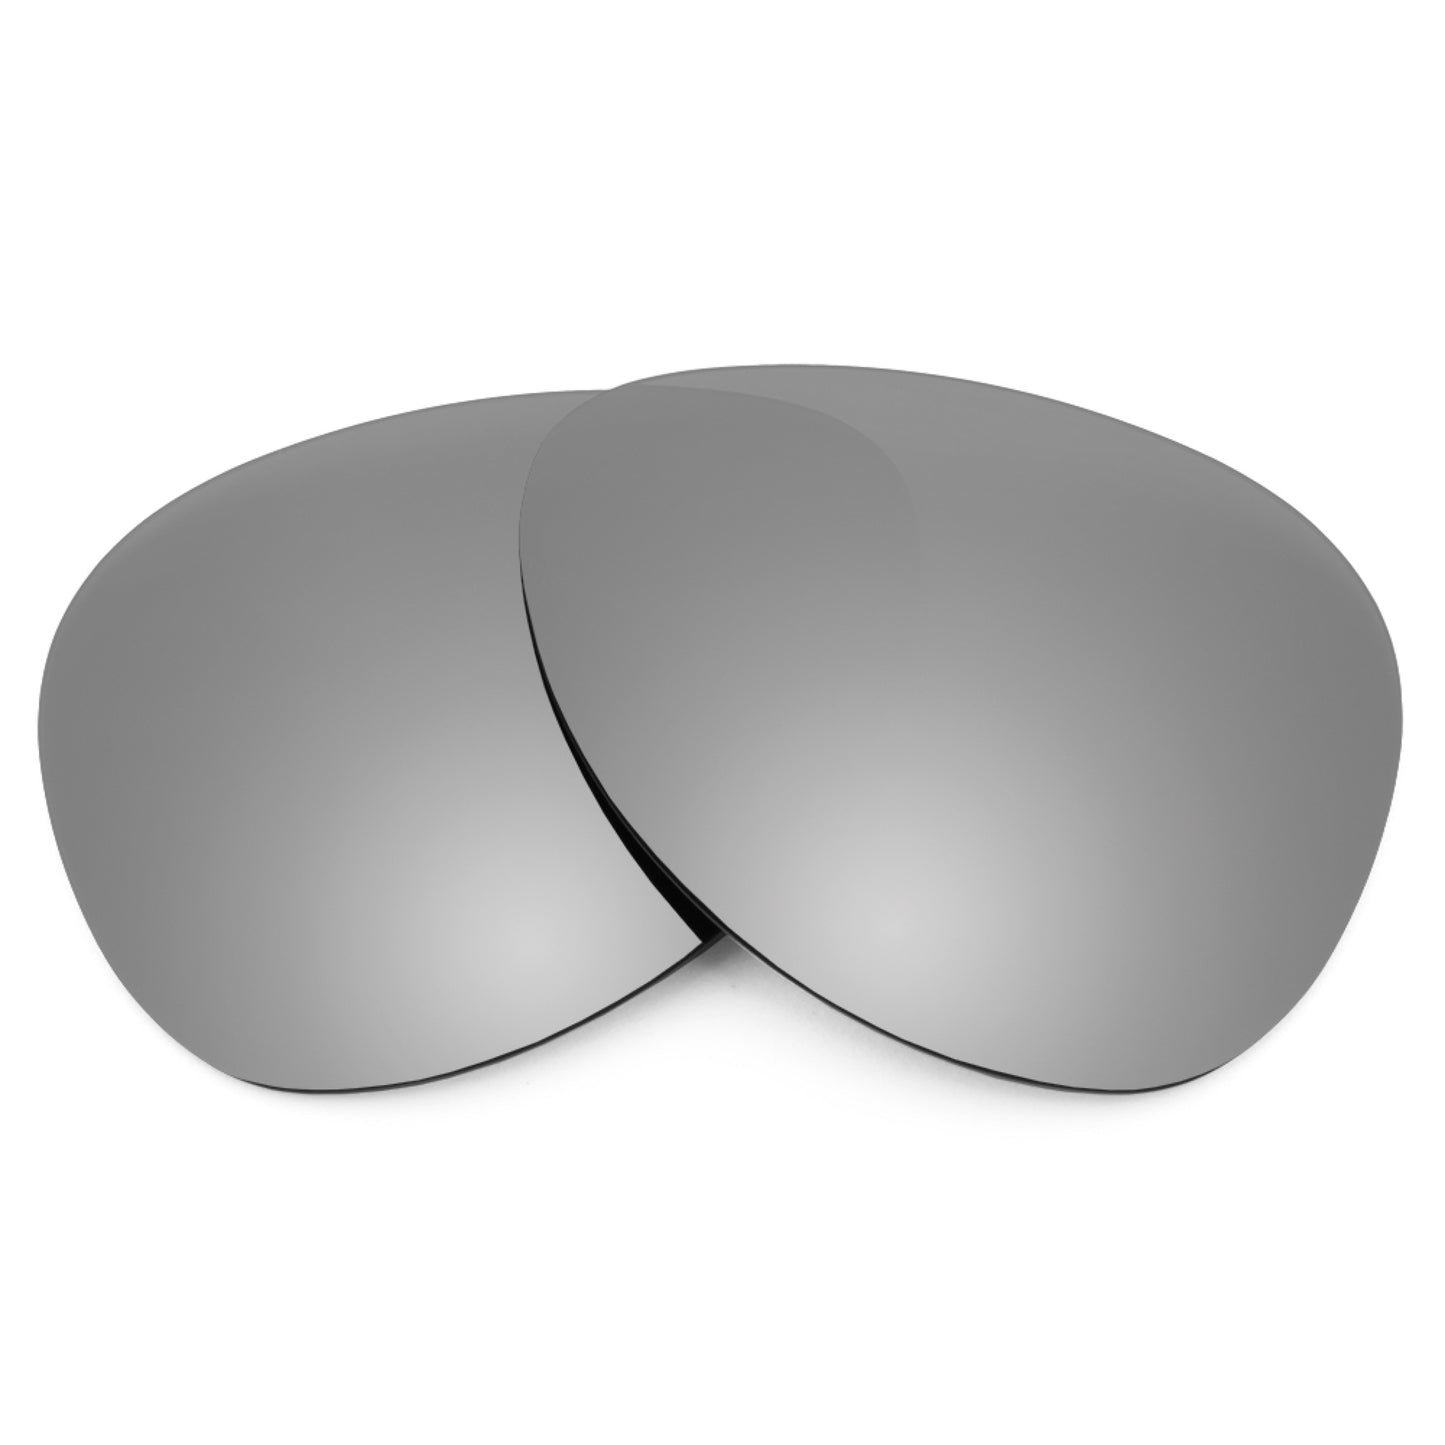 Revant replacement lenses for Ray-Ban Cats 5000 RB4125 59mm Non-Polarized Titanium